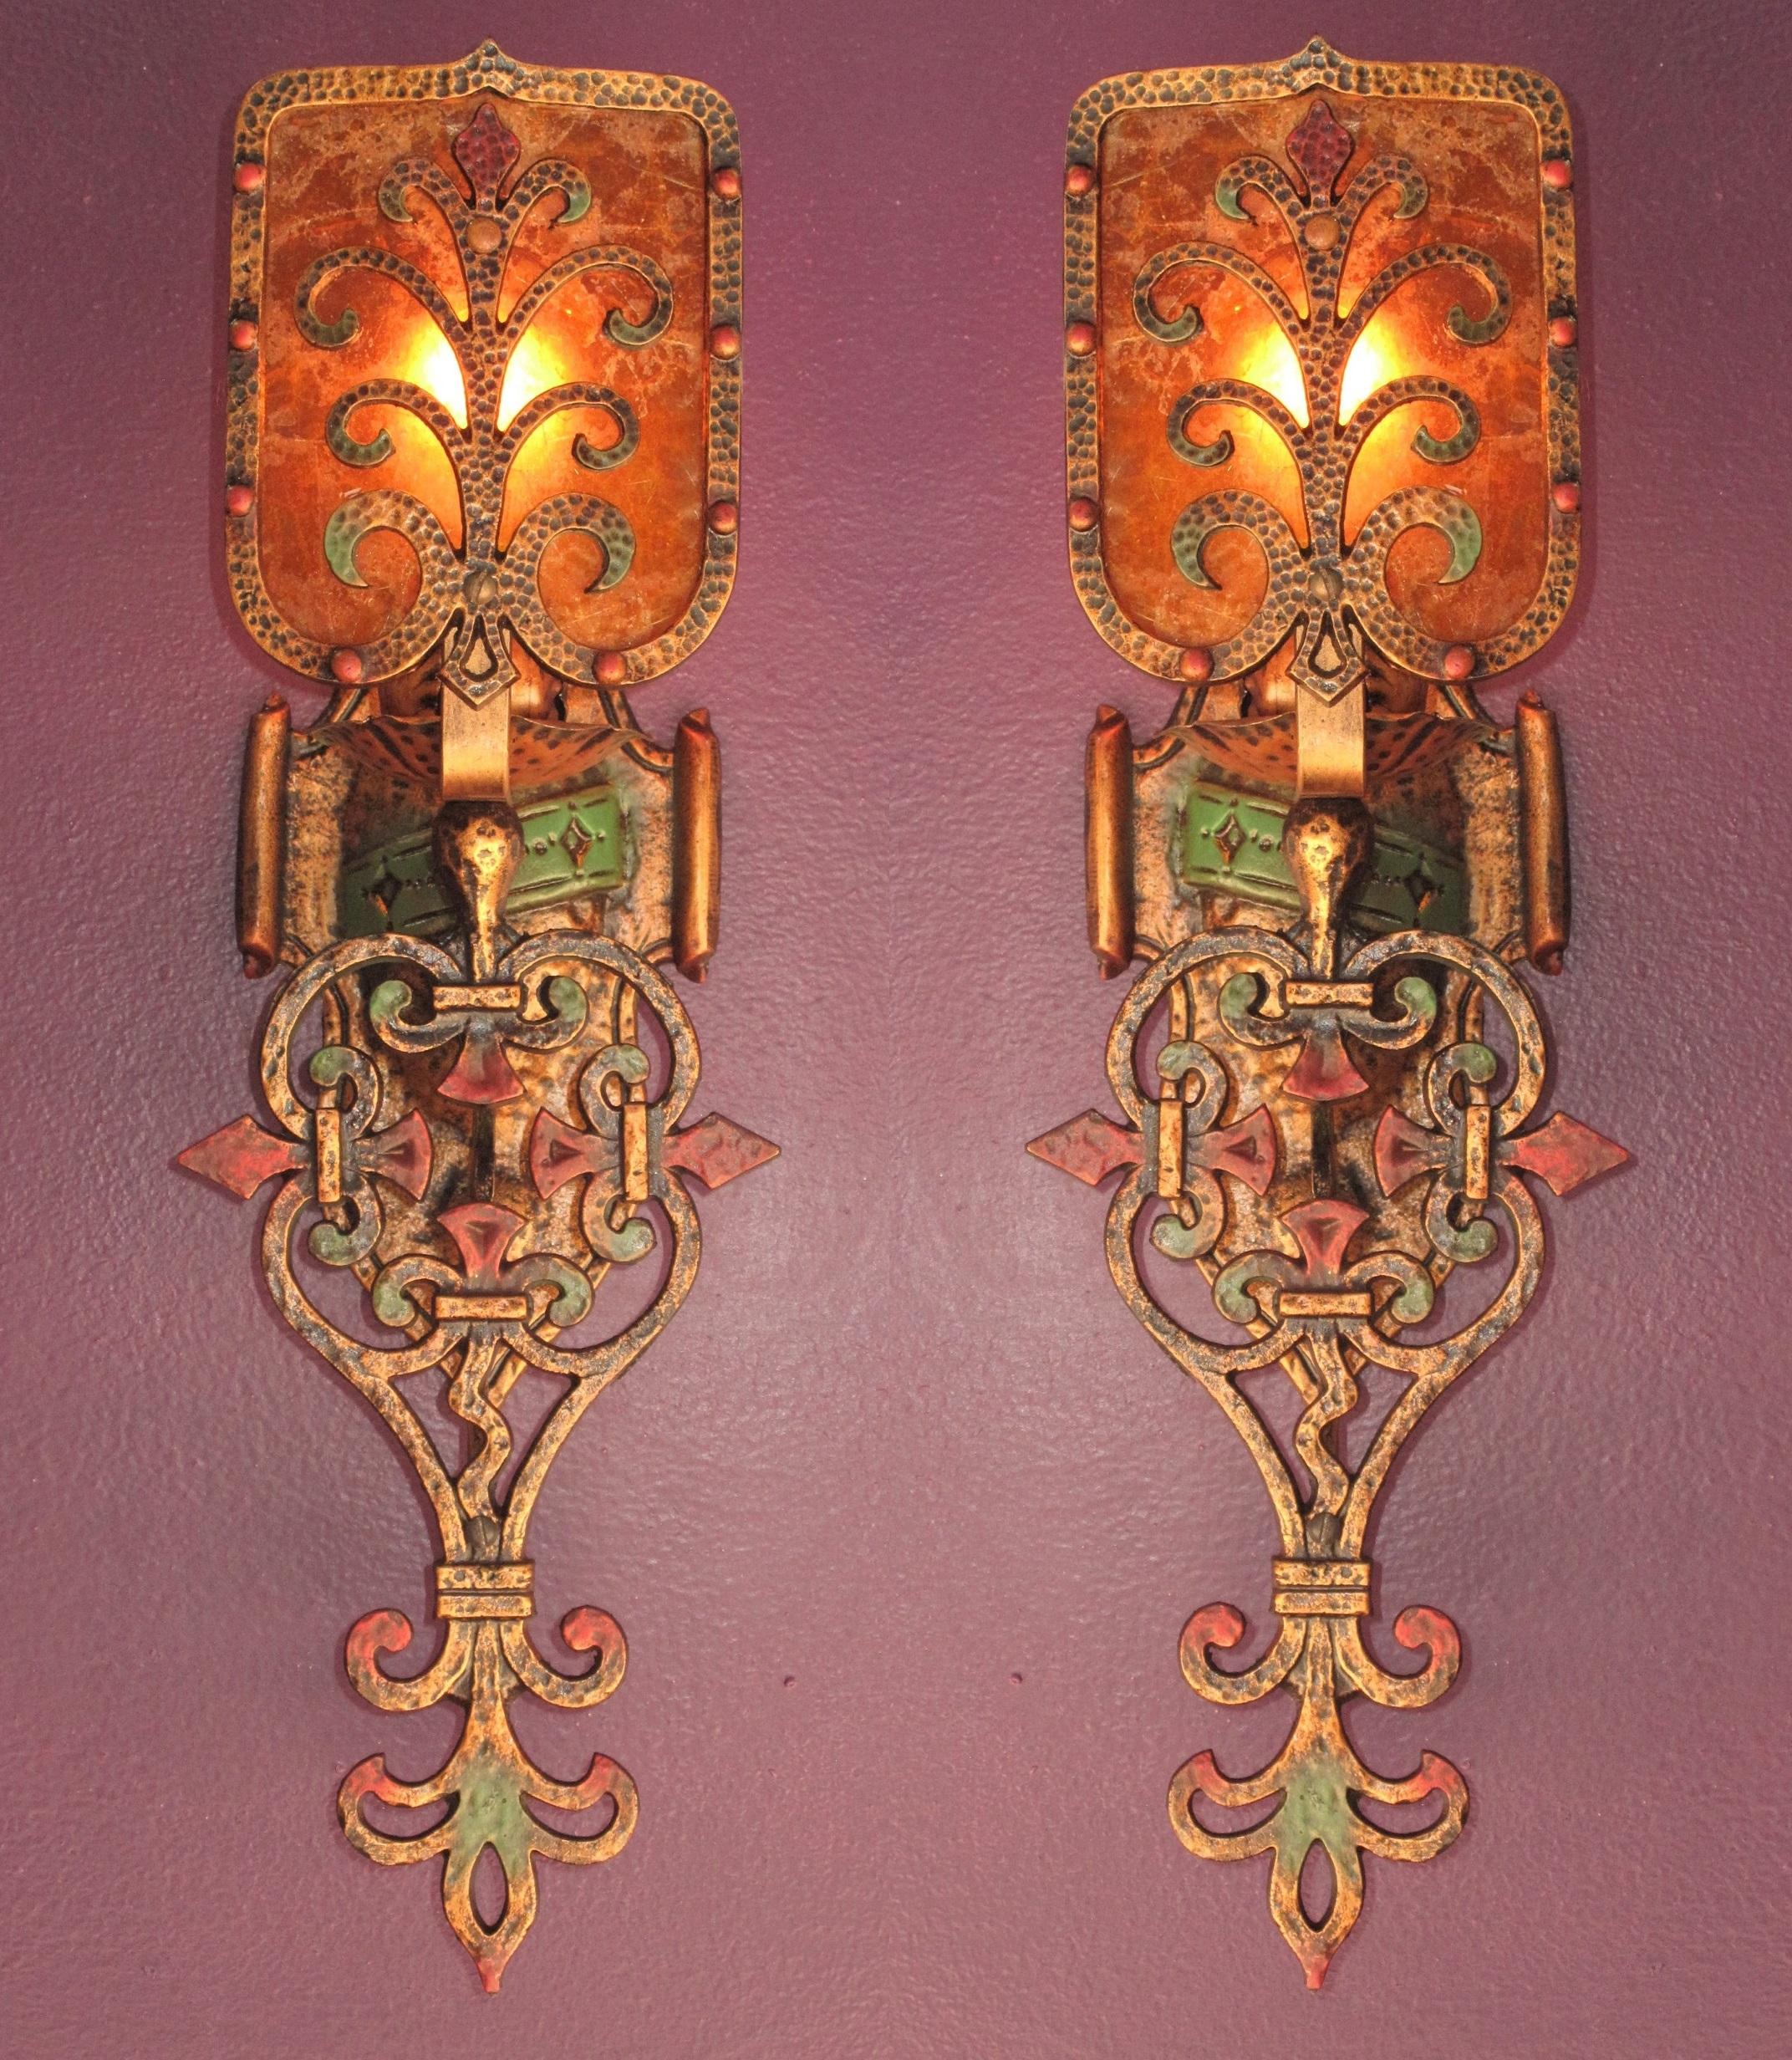 Pair of large and impressive 1920s Spanish Revival sconces with their original mica shade.
They have been painstakingly restored to exactly match original finish and color by our in house artisan. Attributed to the Feldman Co., an LA based lighting